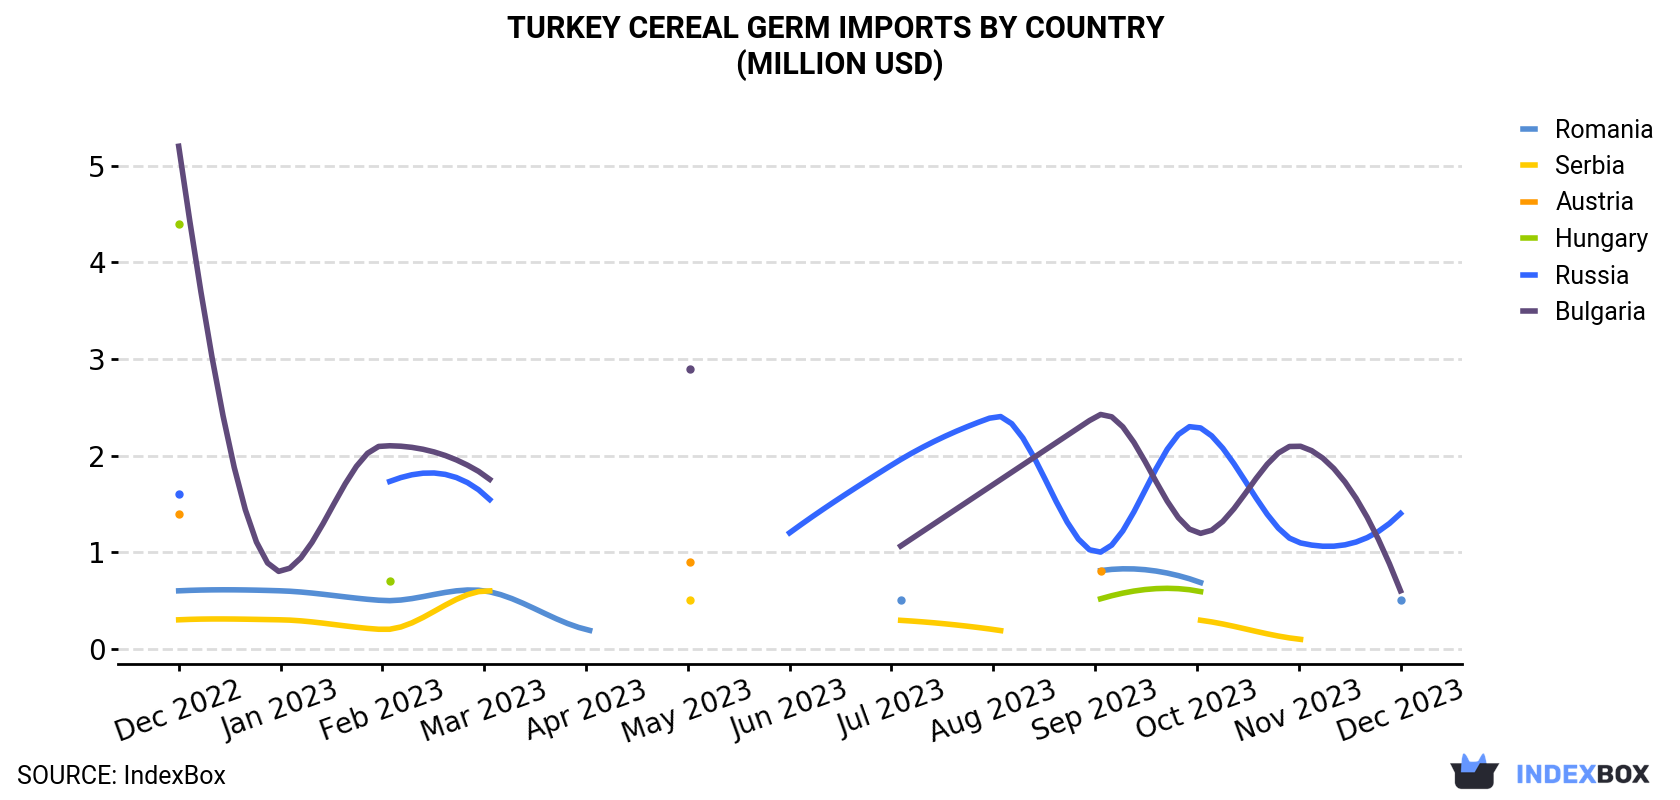 Turkey Cereal Germ Imports By Country (Million USD)